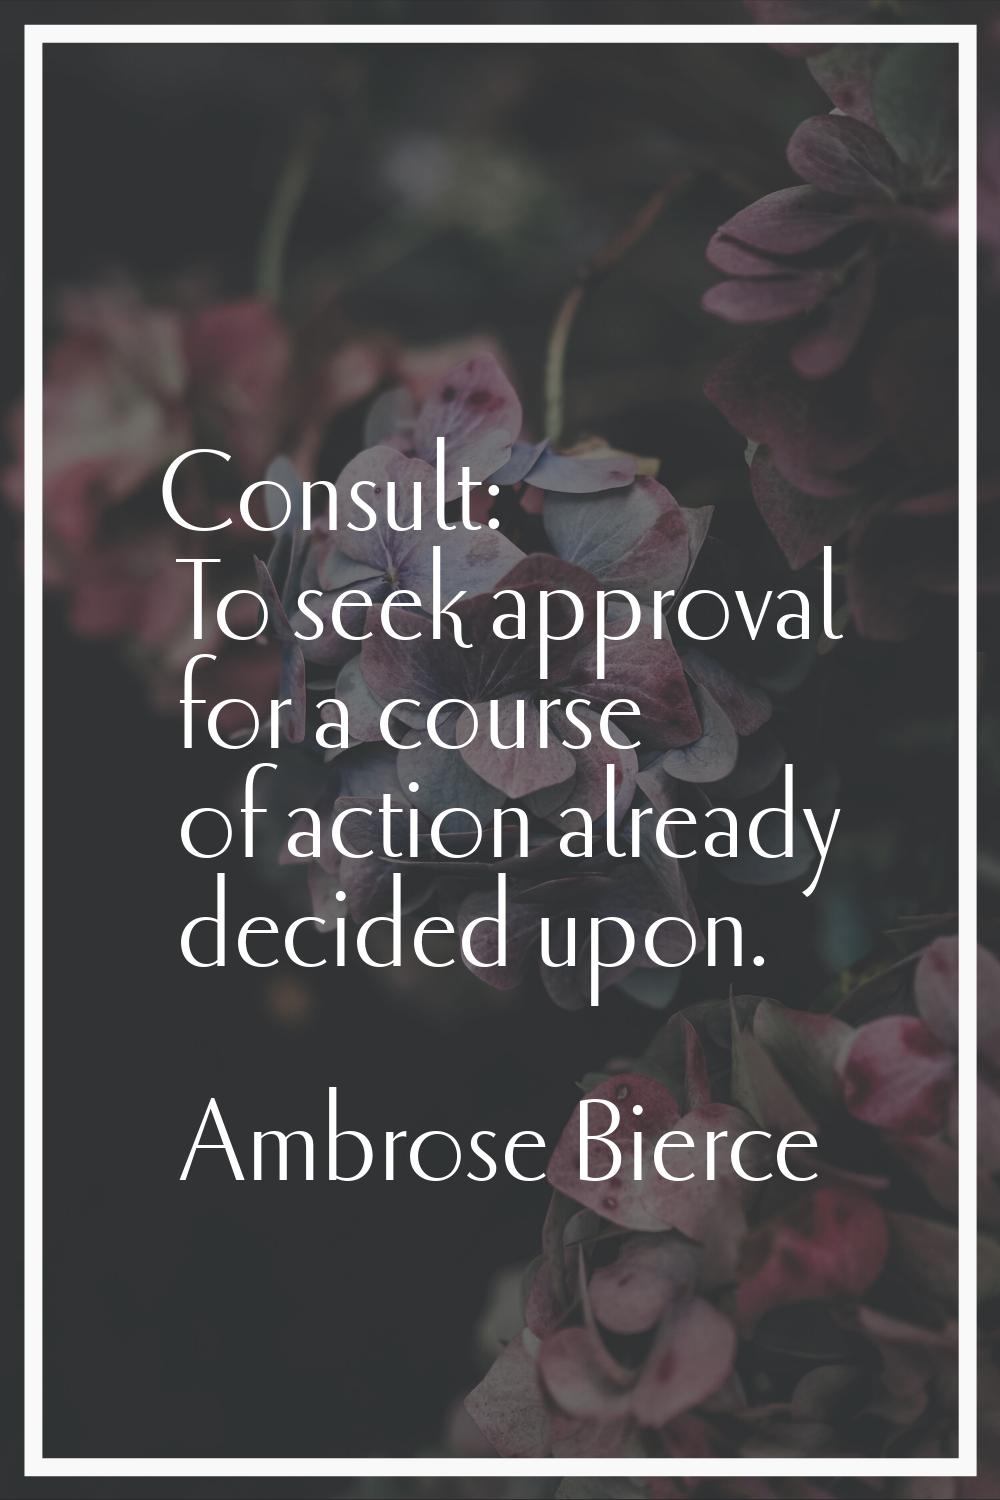 Consult: To seek approval for a course of action already decided upon.